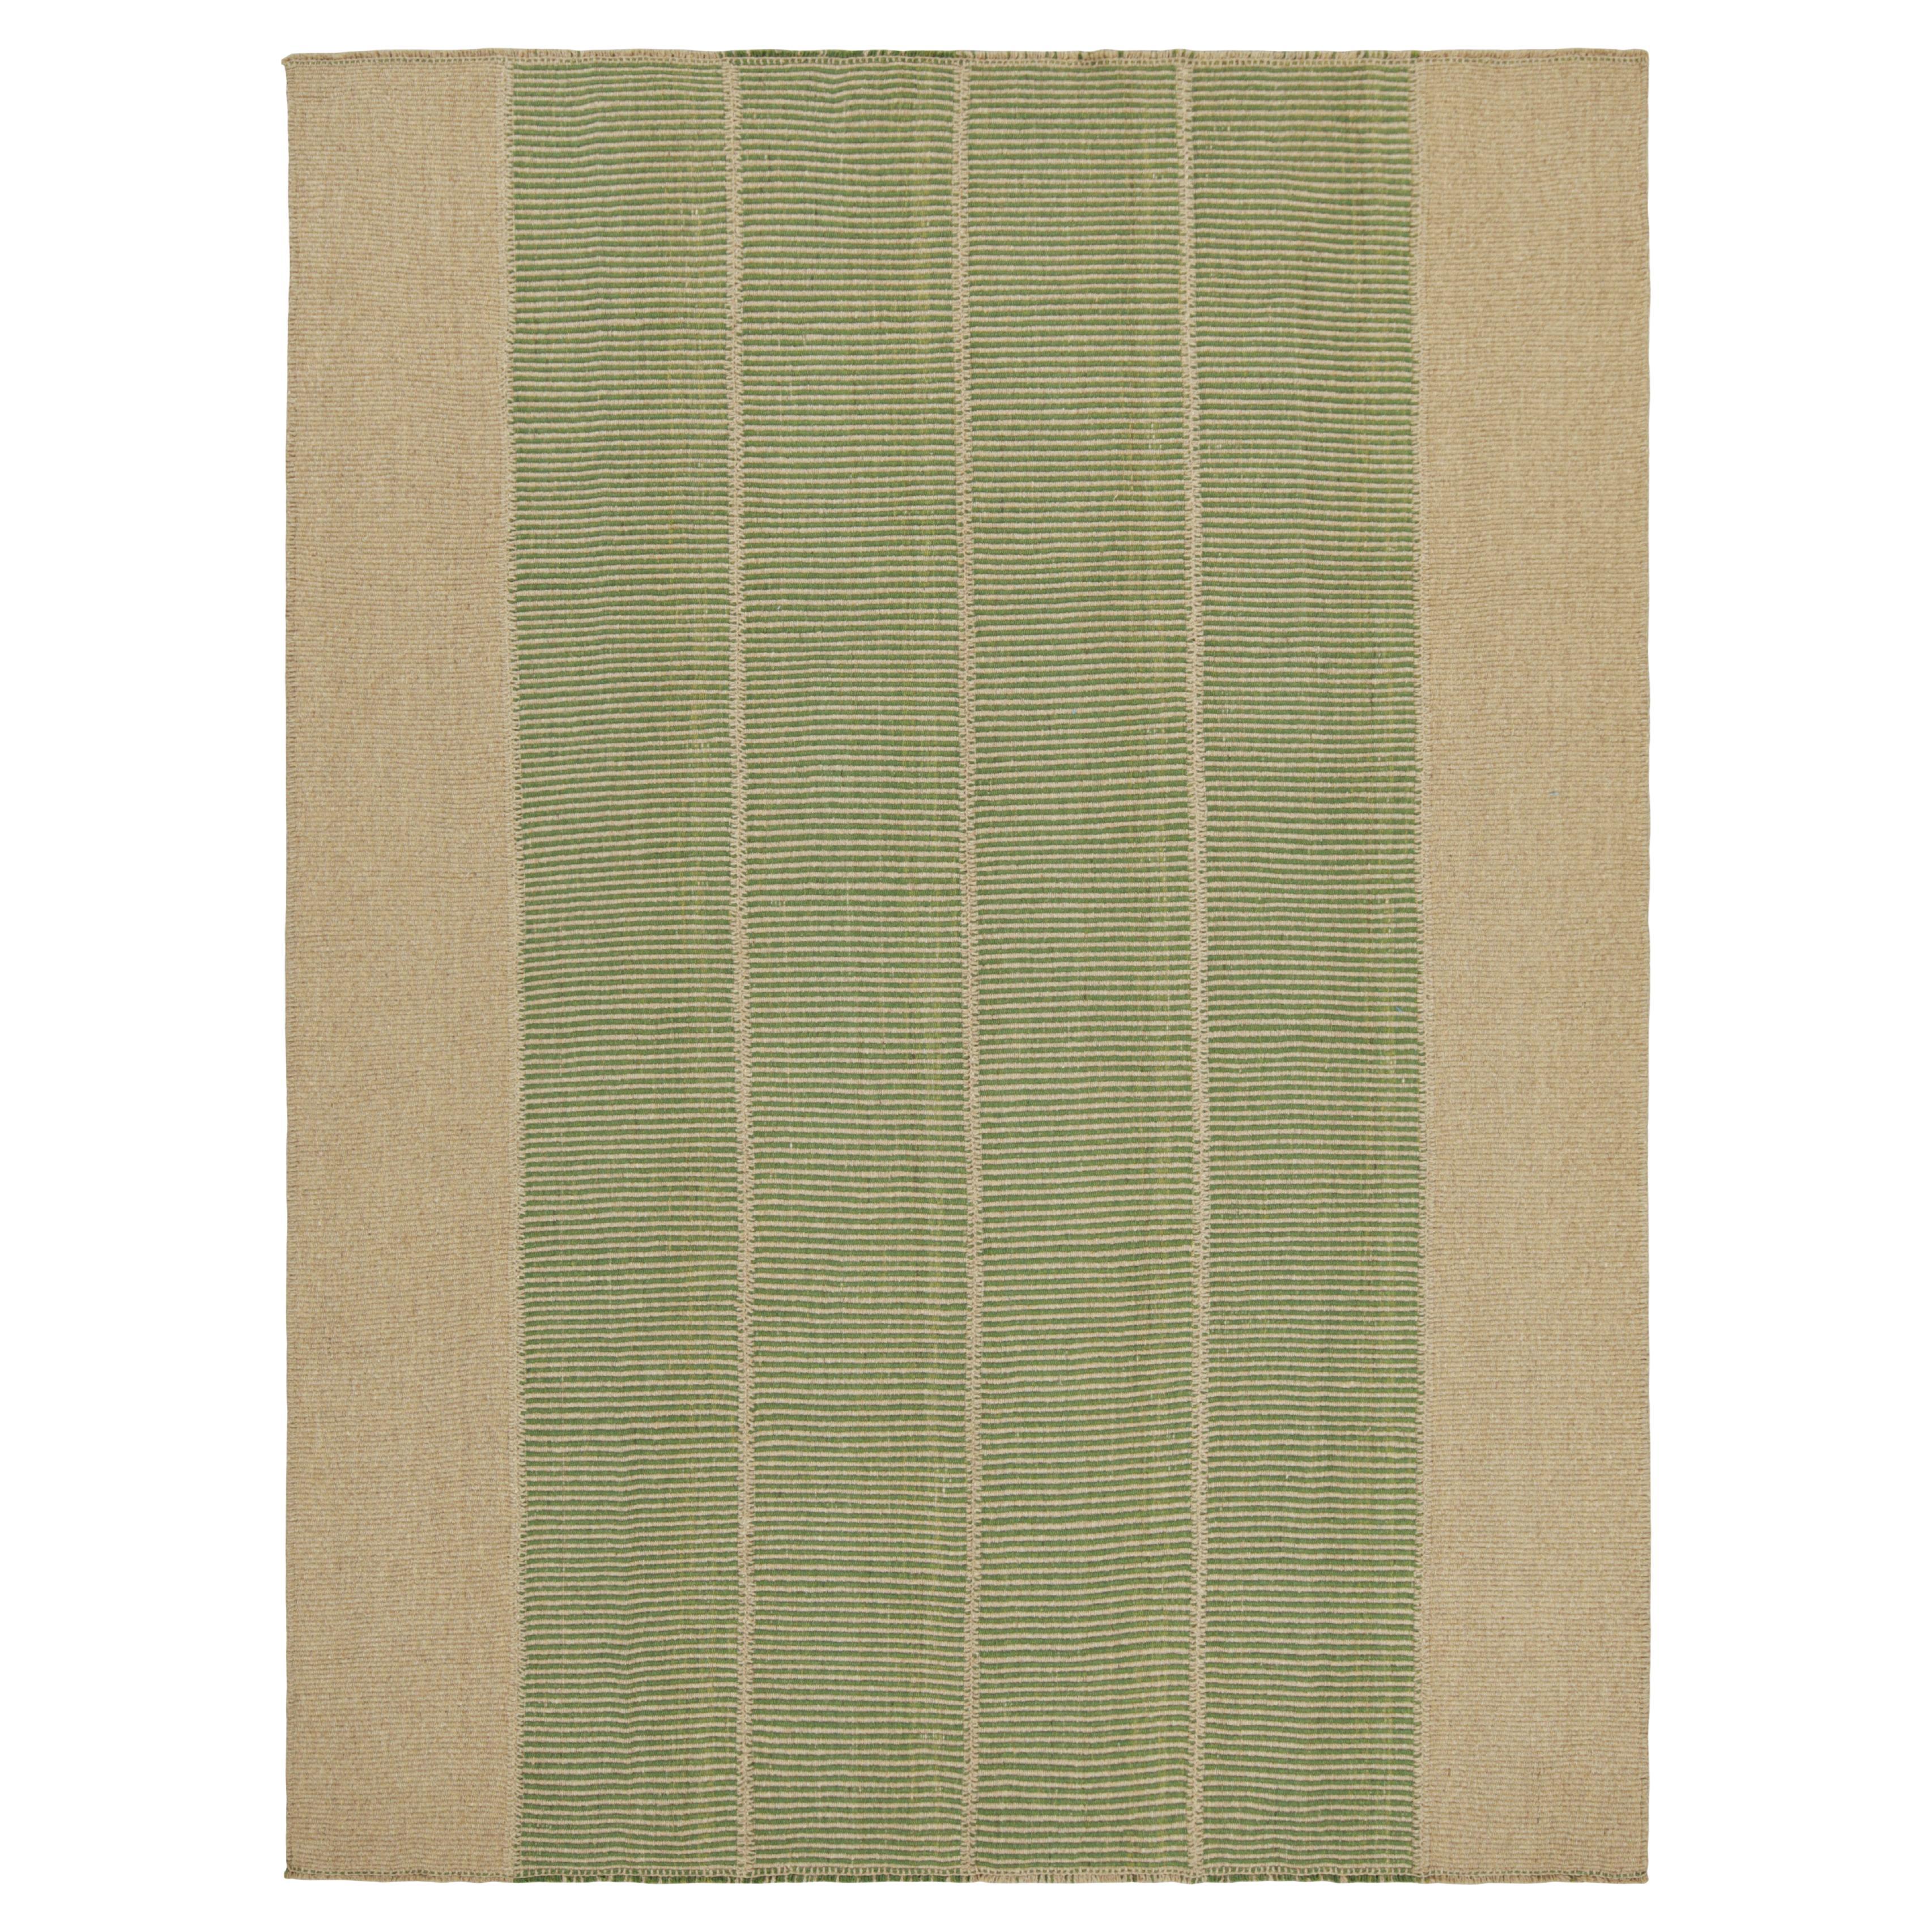 Rug & Kilim’s Contemporary Kilim with Stripes in Green and Brown